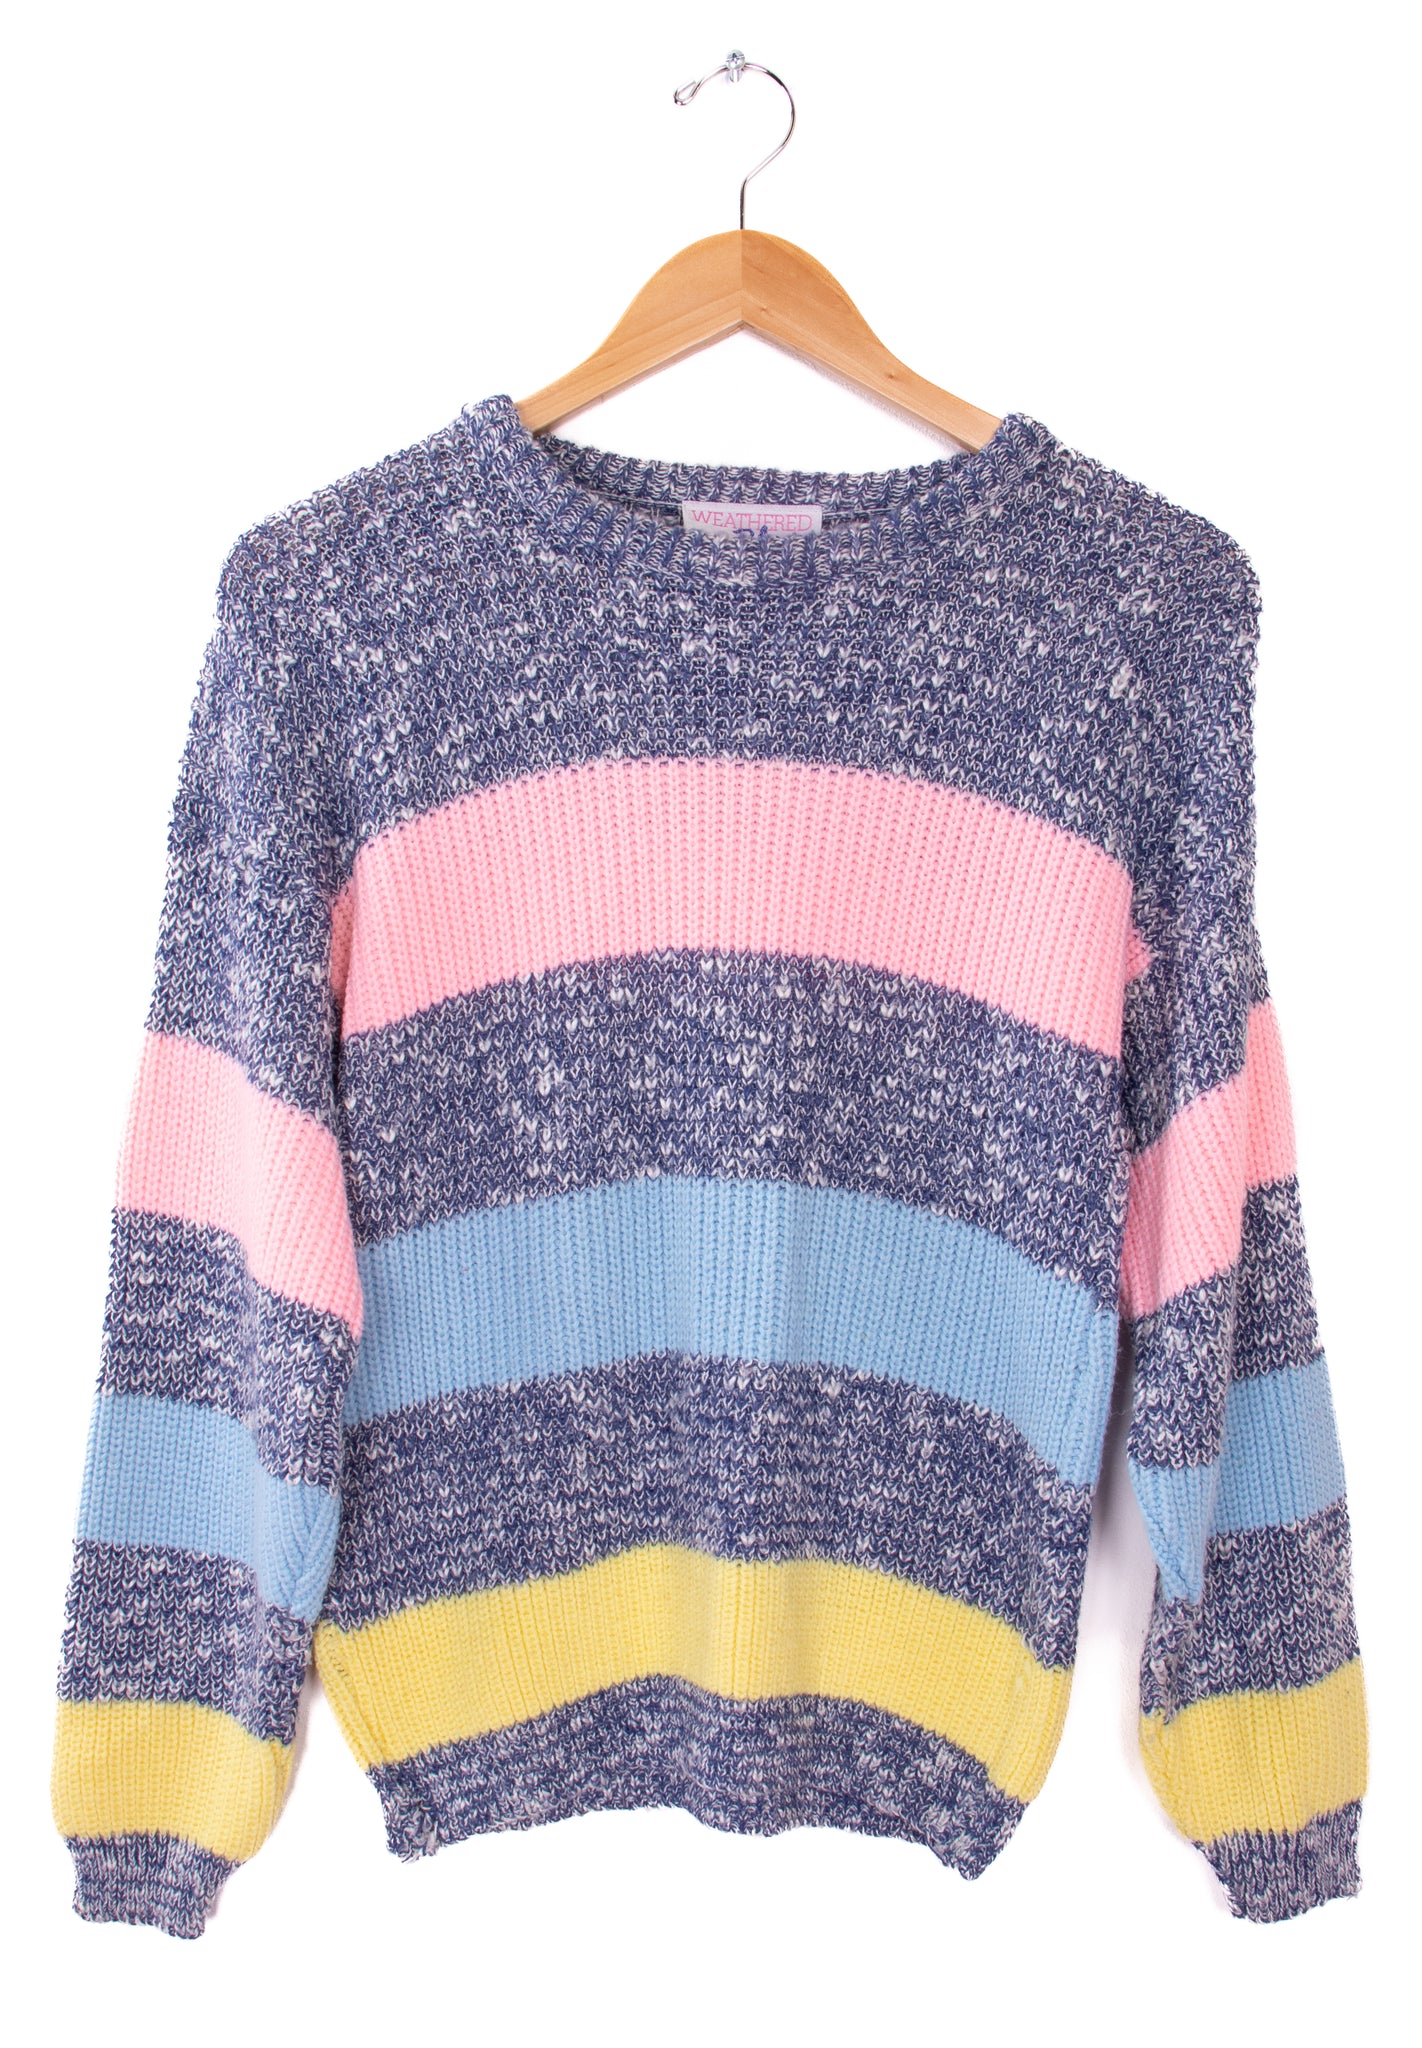 Weathered Blues Pink, Blue, and Yellow Striped Sweater